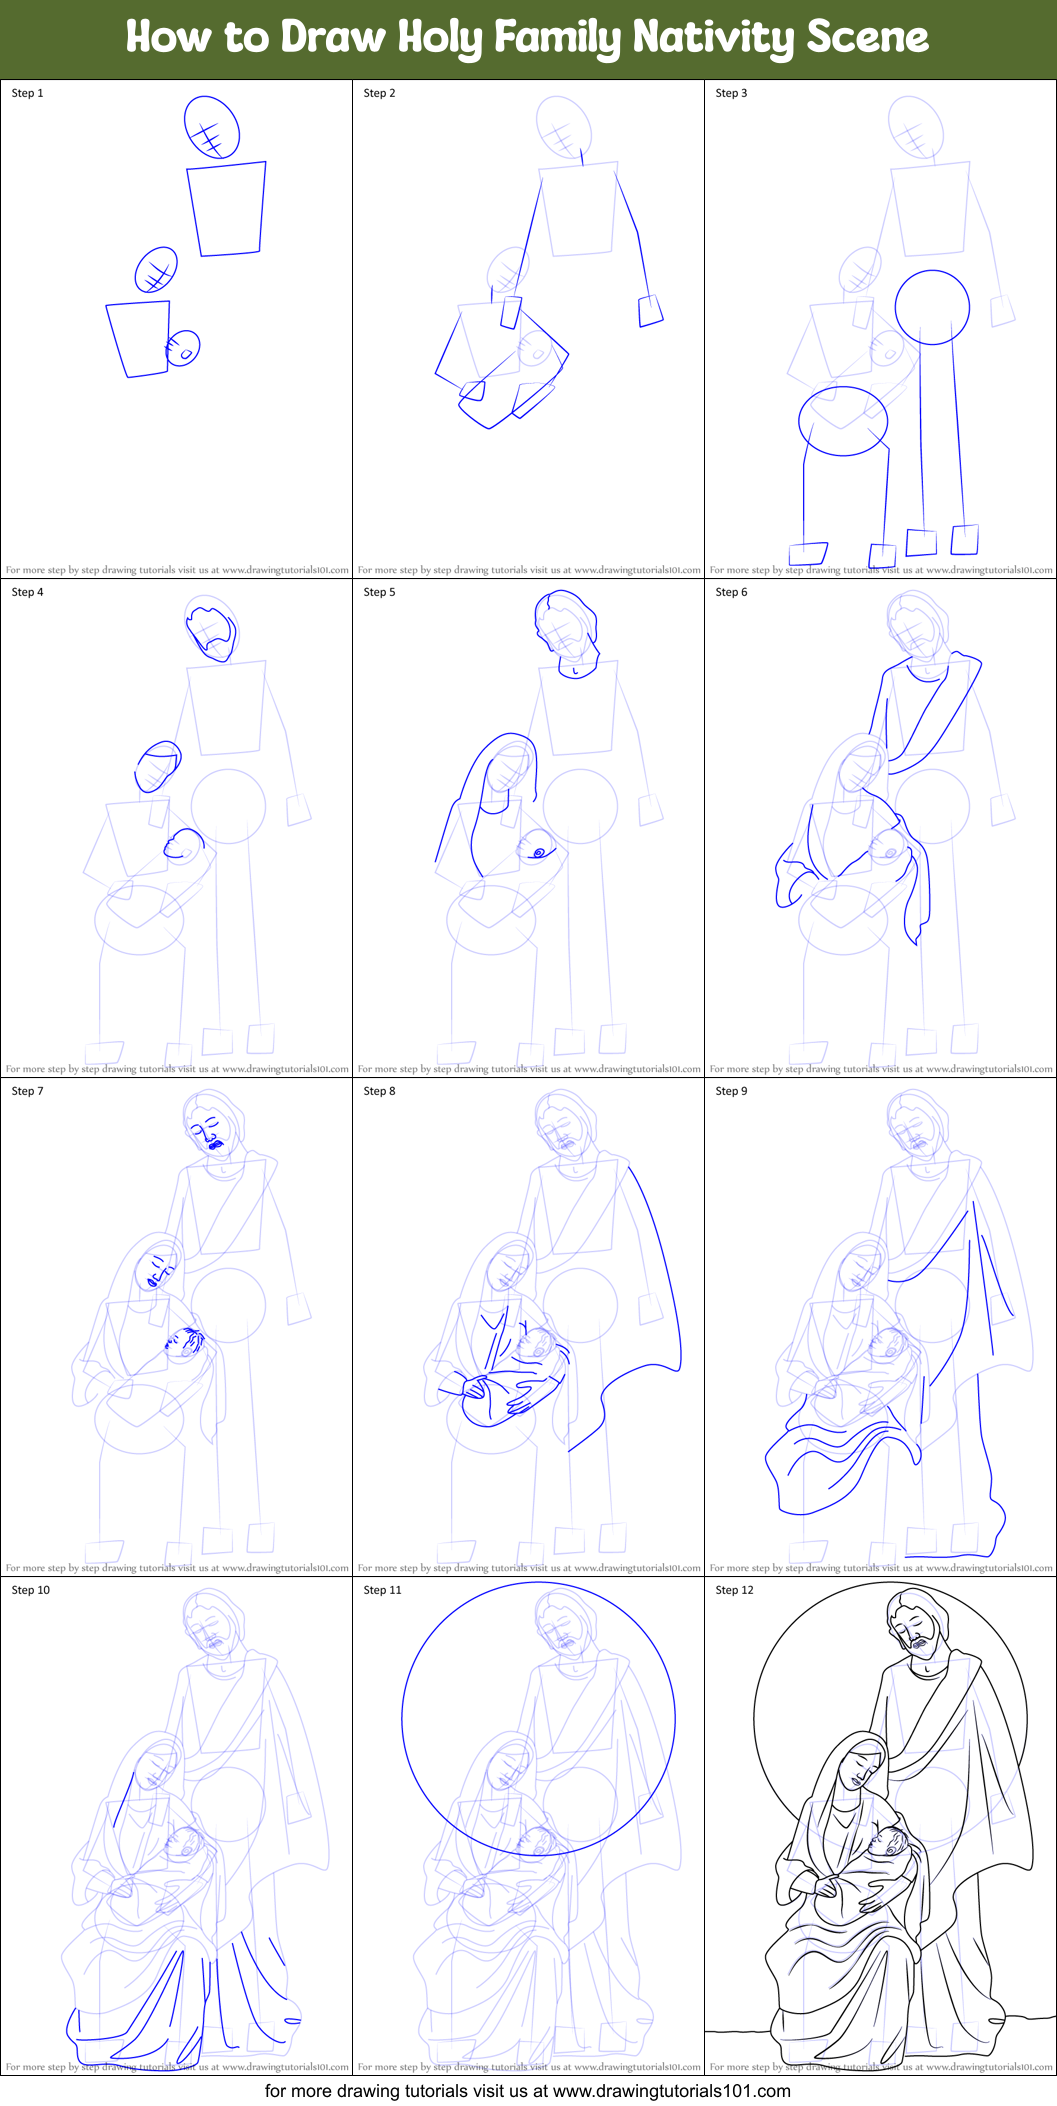 How to Draw Holy Family Nativity Scene printable step by step drawing